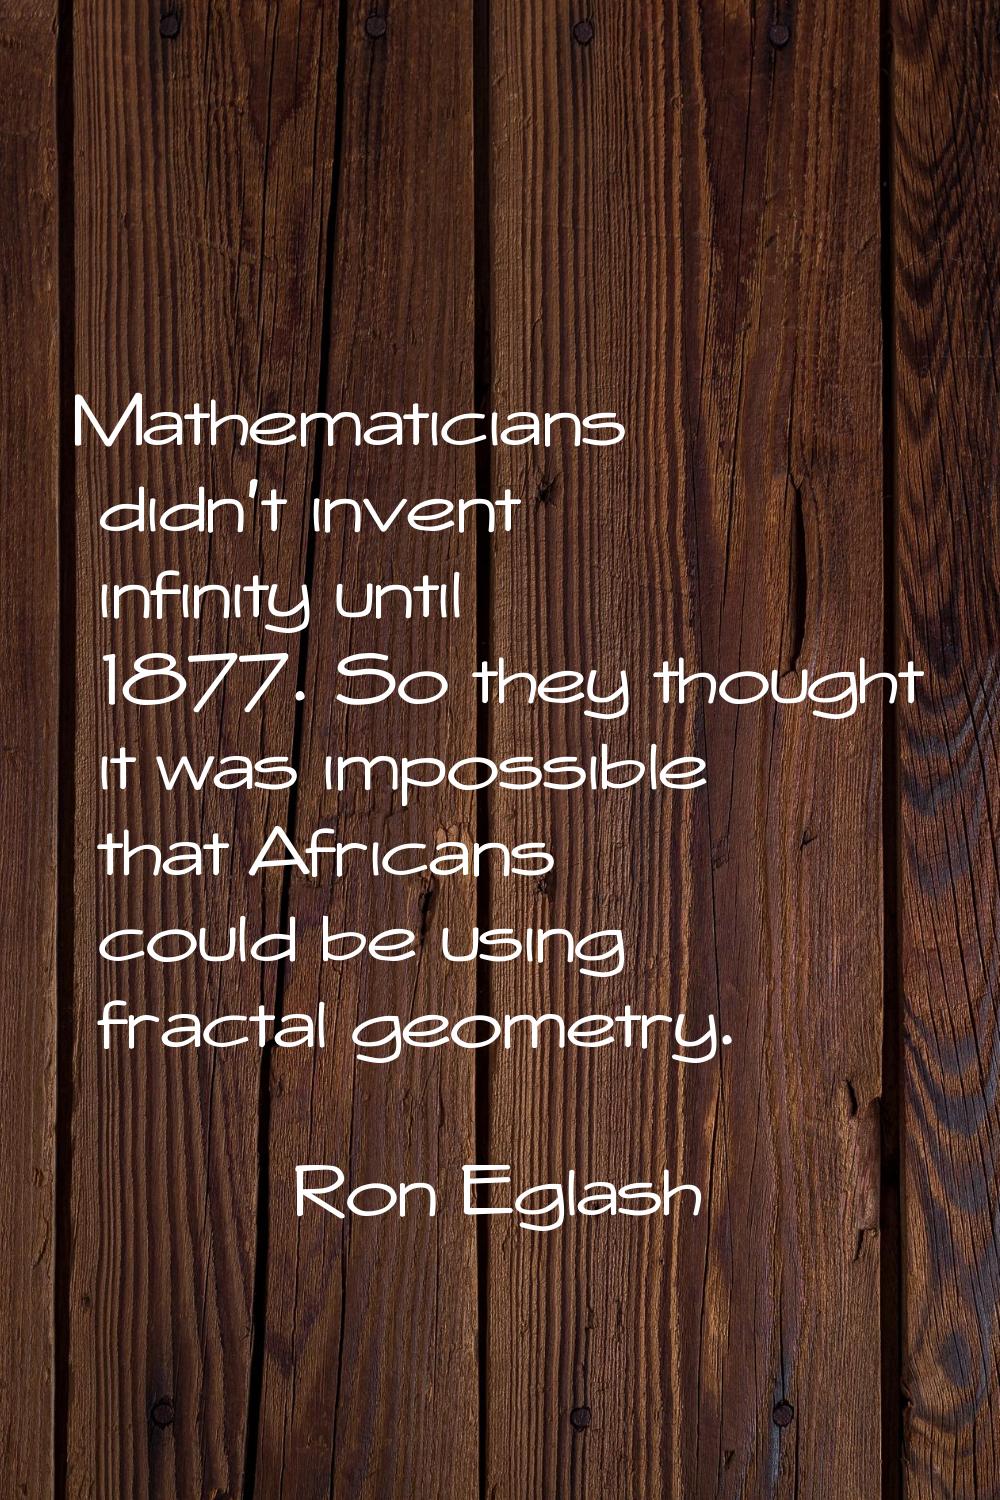 Mathematicians didn't invent infinity until 1877. So they thought it was impossible that Africans c